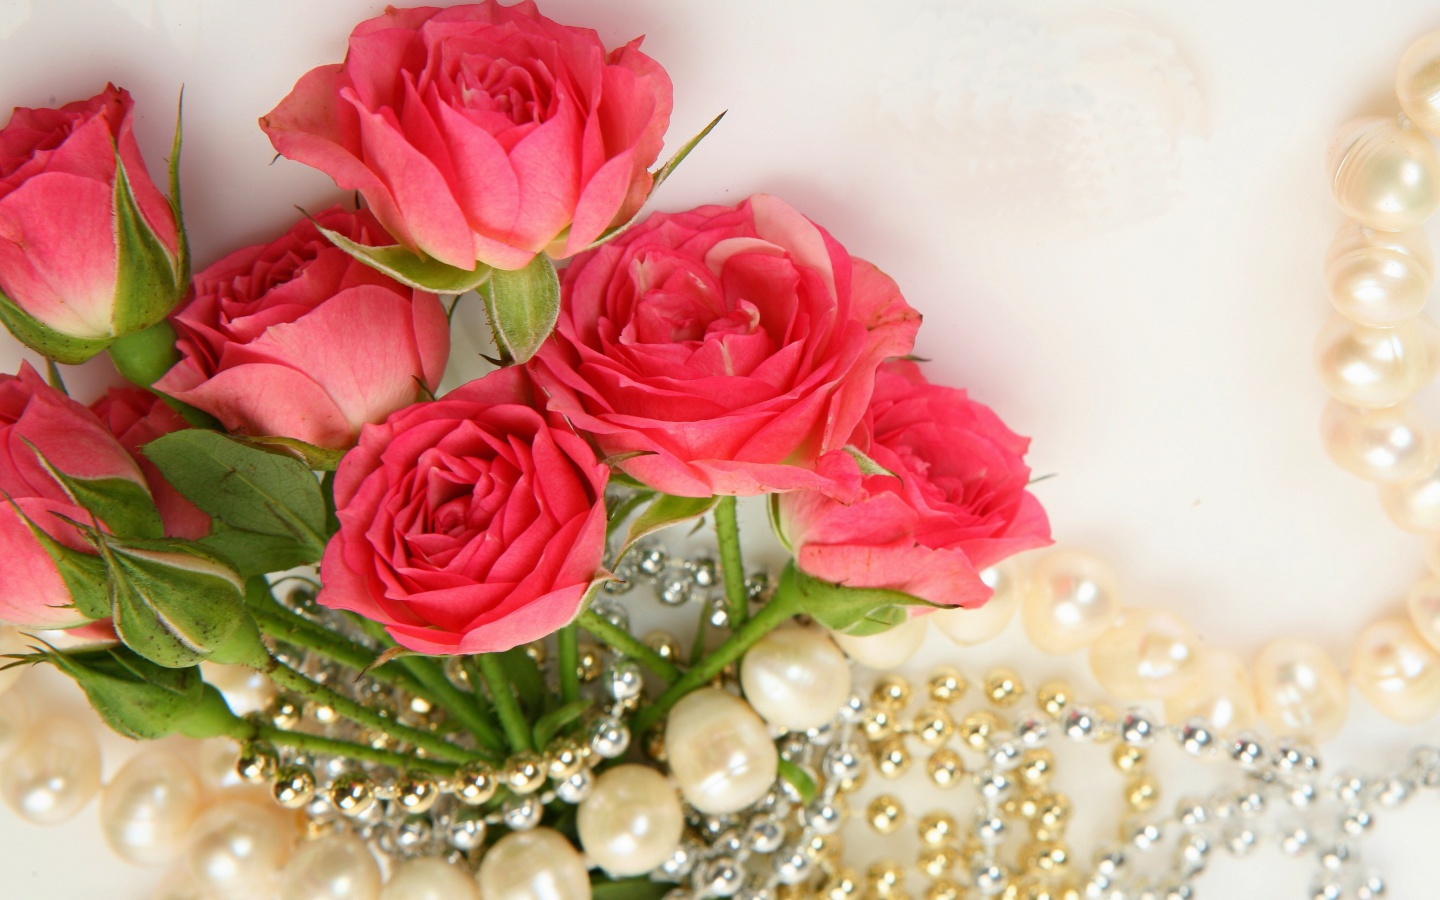 Necklace and Roses Bouquet screenshot #1 1440x900